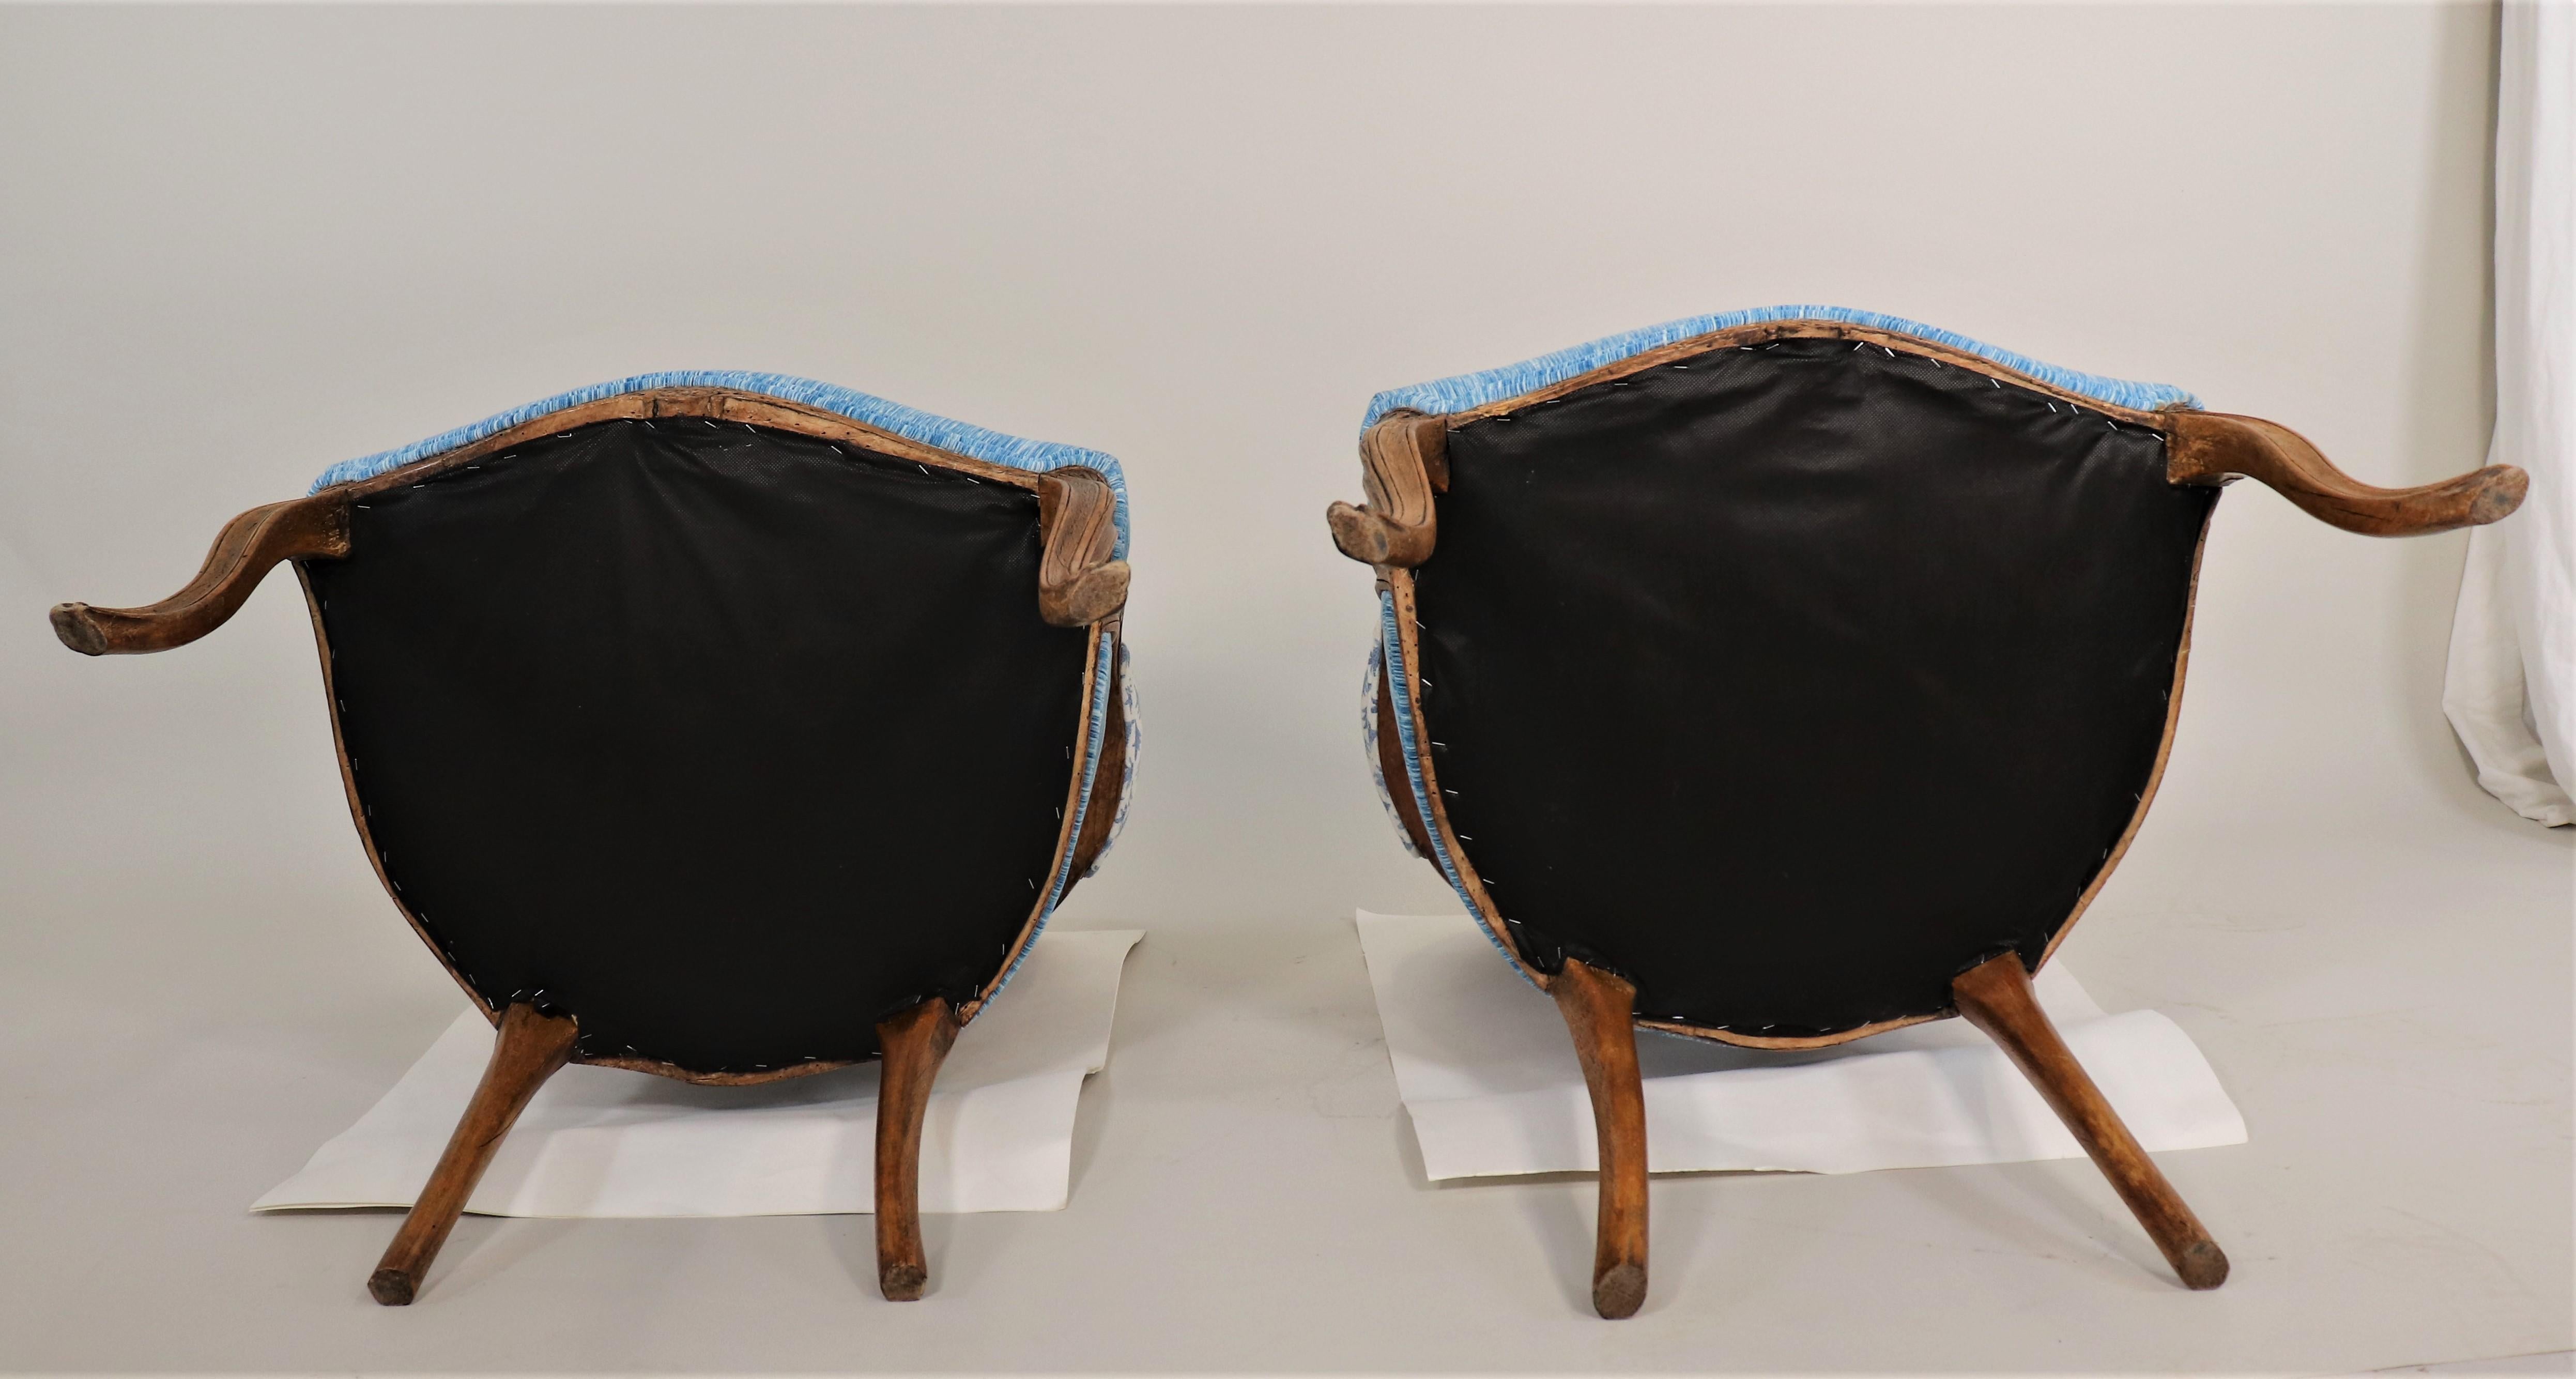 Pair of Mid-19th Century French Régence Style Fauteuils with Modern Fabrics For Sale 5